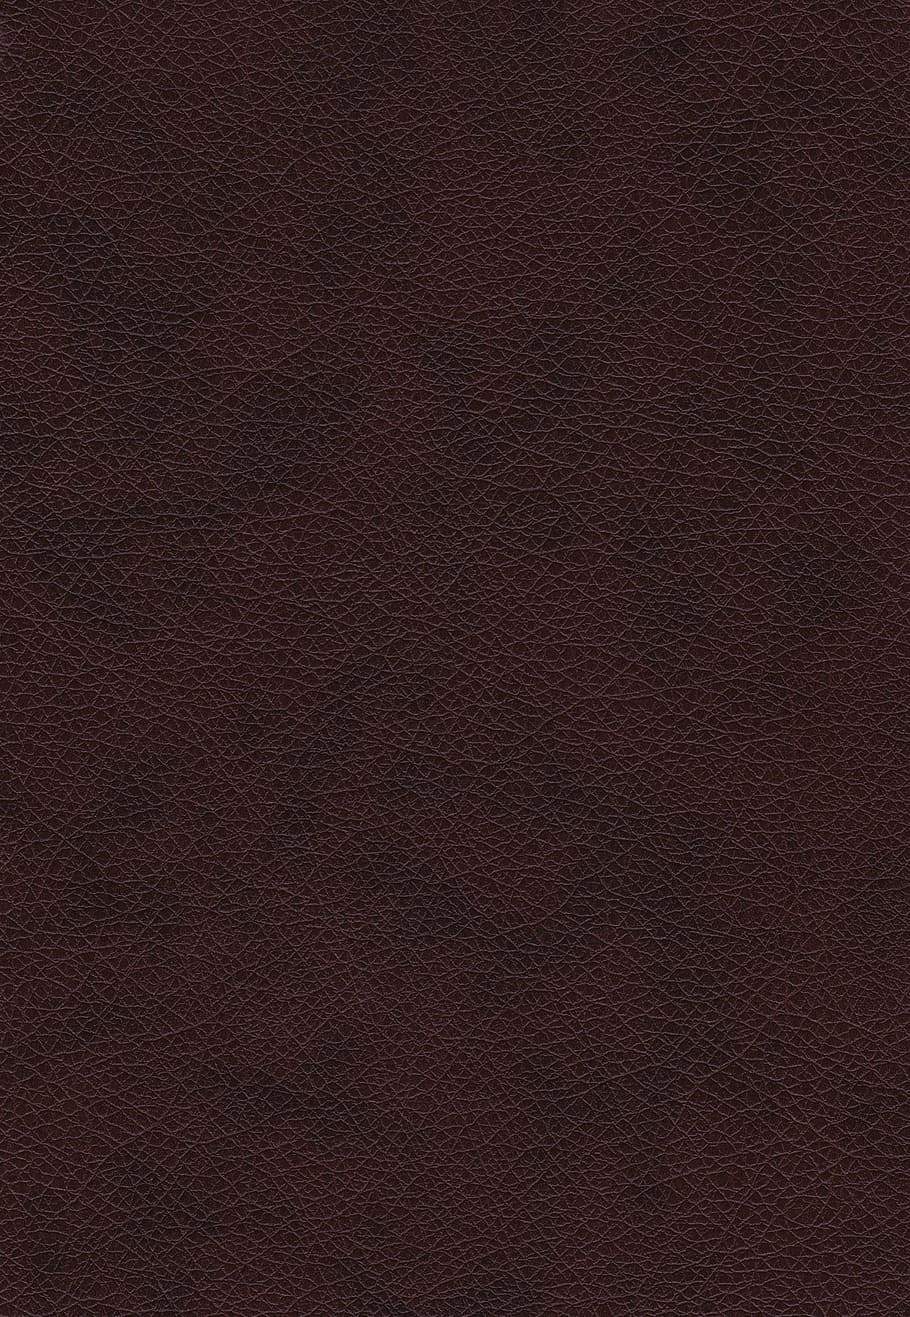 leather, textures, background, fabric, raw, decor, material, pattern